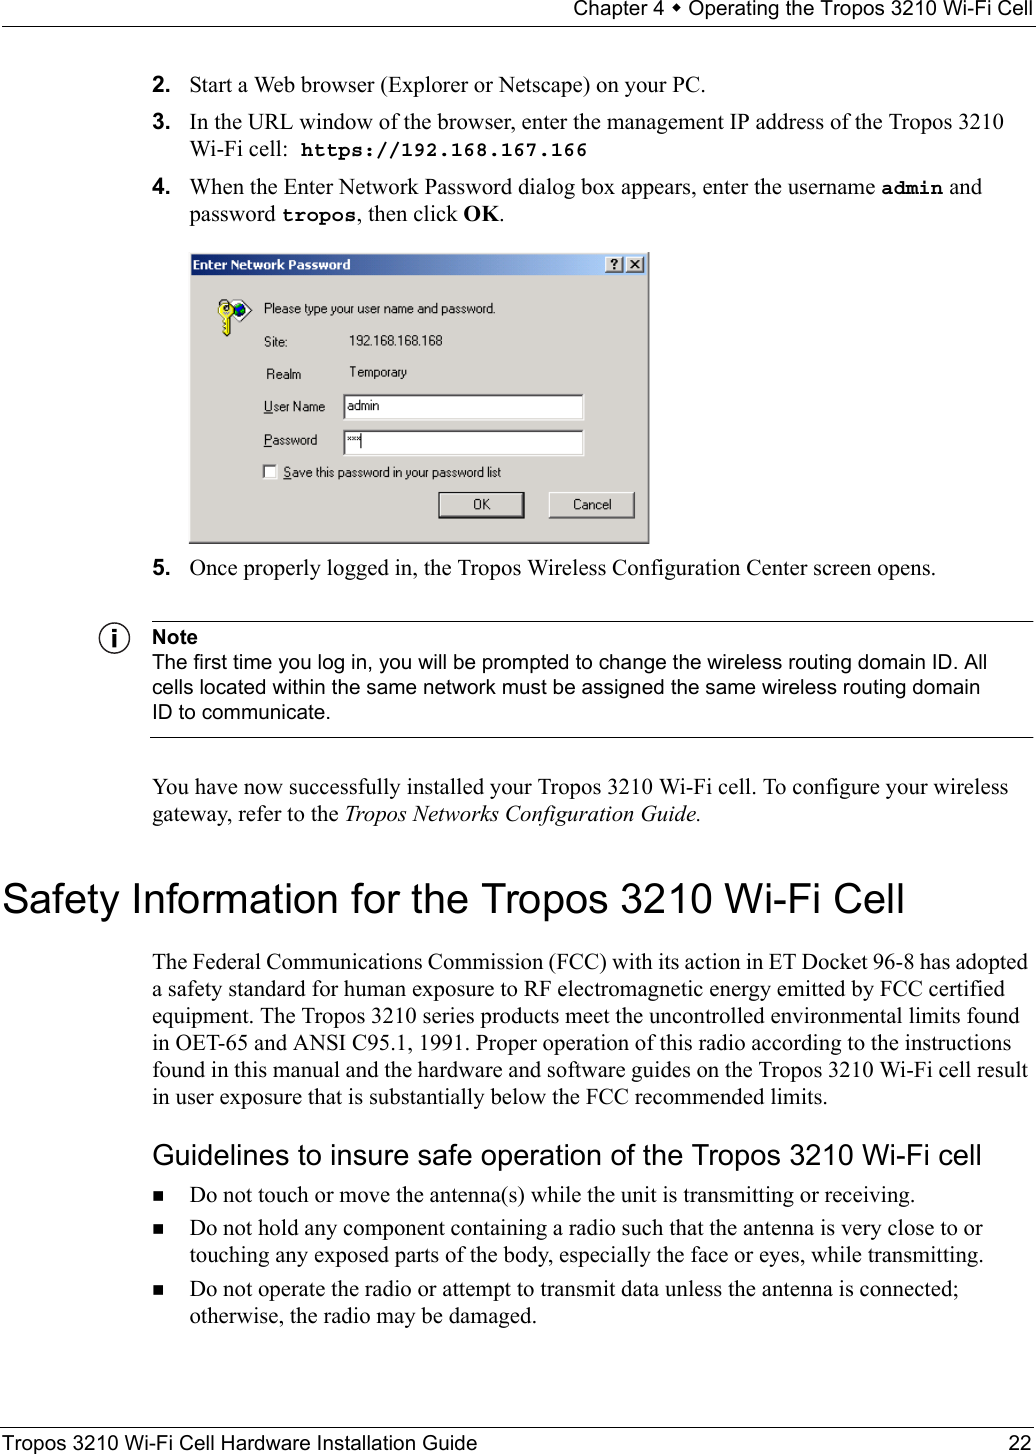 Chapter 4  Operating the Tropos 3210 Wi-Fi CellTropos 3210 Wi-Fi Cell Hardware Installation Guide 222. Start a Web browser (Explorer or Netscape) on your PC.3. In the URL window of the browser, enter the management IP address of the Tropos 3210 Wi-Fi cell: https://192.168.167.1664. When the Enter Network Password dialog box appears, enter the username admin and password tropos, then click OK.5. Once properly logged in, the Tropos Wireless Configuration Center screen opens. NoteThe first time you log in, you will be prompted to change the wireless routing domain ID. All cells located within the same network must be assigned the same wireless routing domain ID to communicate.You have now successfully installed your Tropos 3210 Wi-Fi cell. To configure your wireless gateway, refer to the Tropos Networks Configuration Guide.Safety Information for the Tropos 3210 Wi-Fi CellThe Federal Communications Commission (FCC) with its action in ET Docket 96-8 has adopted a safety standard for human exposure to RF electromagnetic energy emitted by FCC certified equipment. The Tropos 3210 series products meet the uncontrolled environmental limits found in OET-65 and ANSI C95.1, 1991. Proper operation of this radio according to the instructions found in this manual and the hardware and software guides on the Tropos 3210 Wi-Fi cell result in user exposure that is substantially below the FCC recommended limits.Guidelines to insure safe operation of the Tropos 3210 Wi-Fi cellDo not touch or move the antenna(s) while the unit is transmitting or receiving.Do not hold any component containing a radio such that the antenna is very close to or touching any exposed parts of the body, especially the face or eyes, while transmitting. Do not operate the radio or attempt to transmit data unless the antenna is connected; otherwise, the radio may be damaged.